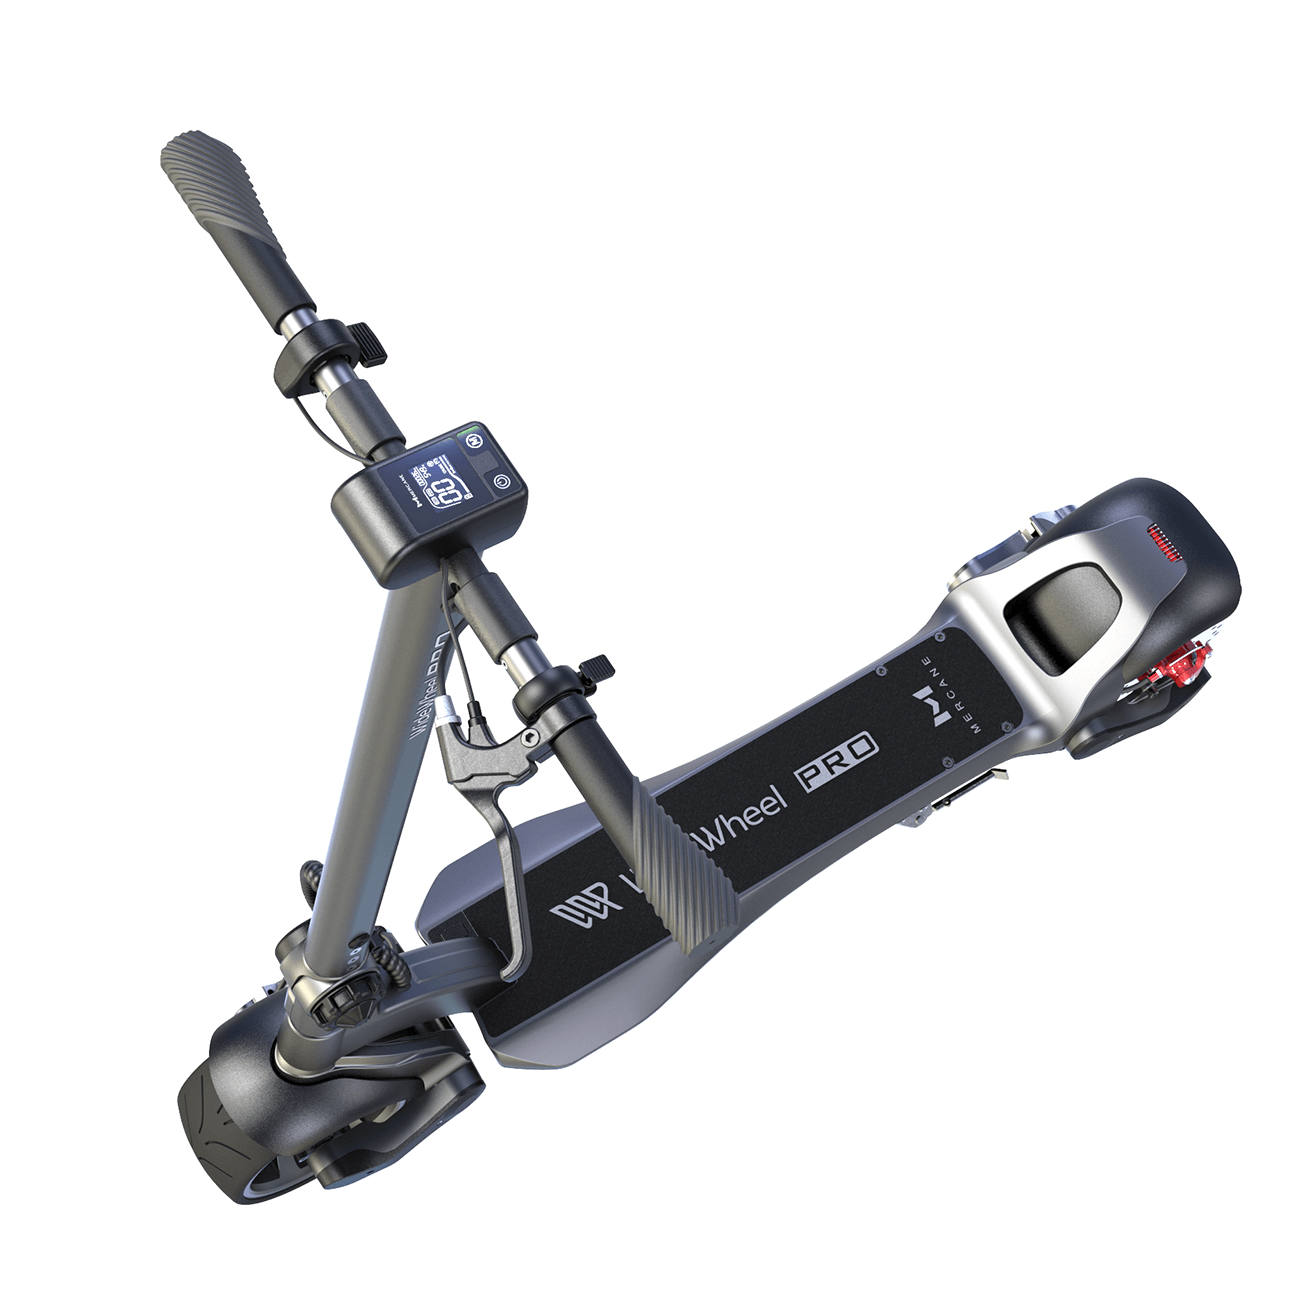 Mercane widewheel Pro Electric Scooter features